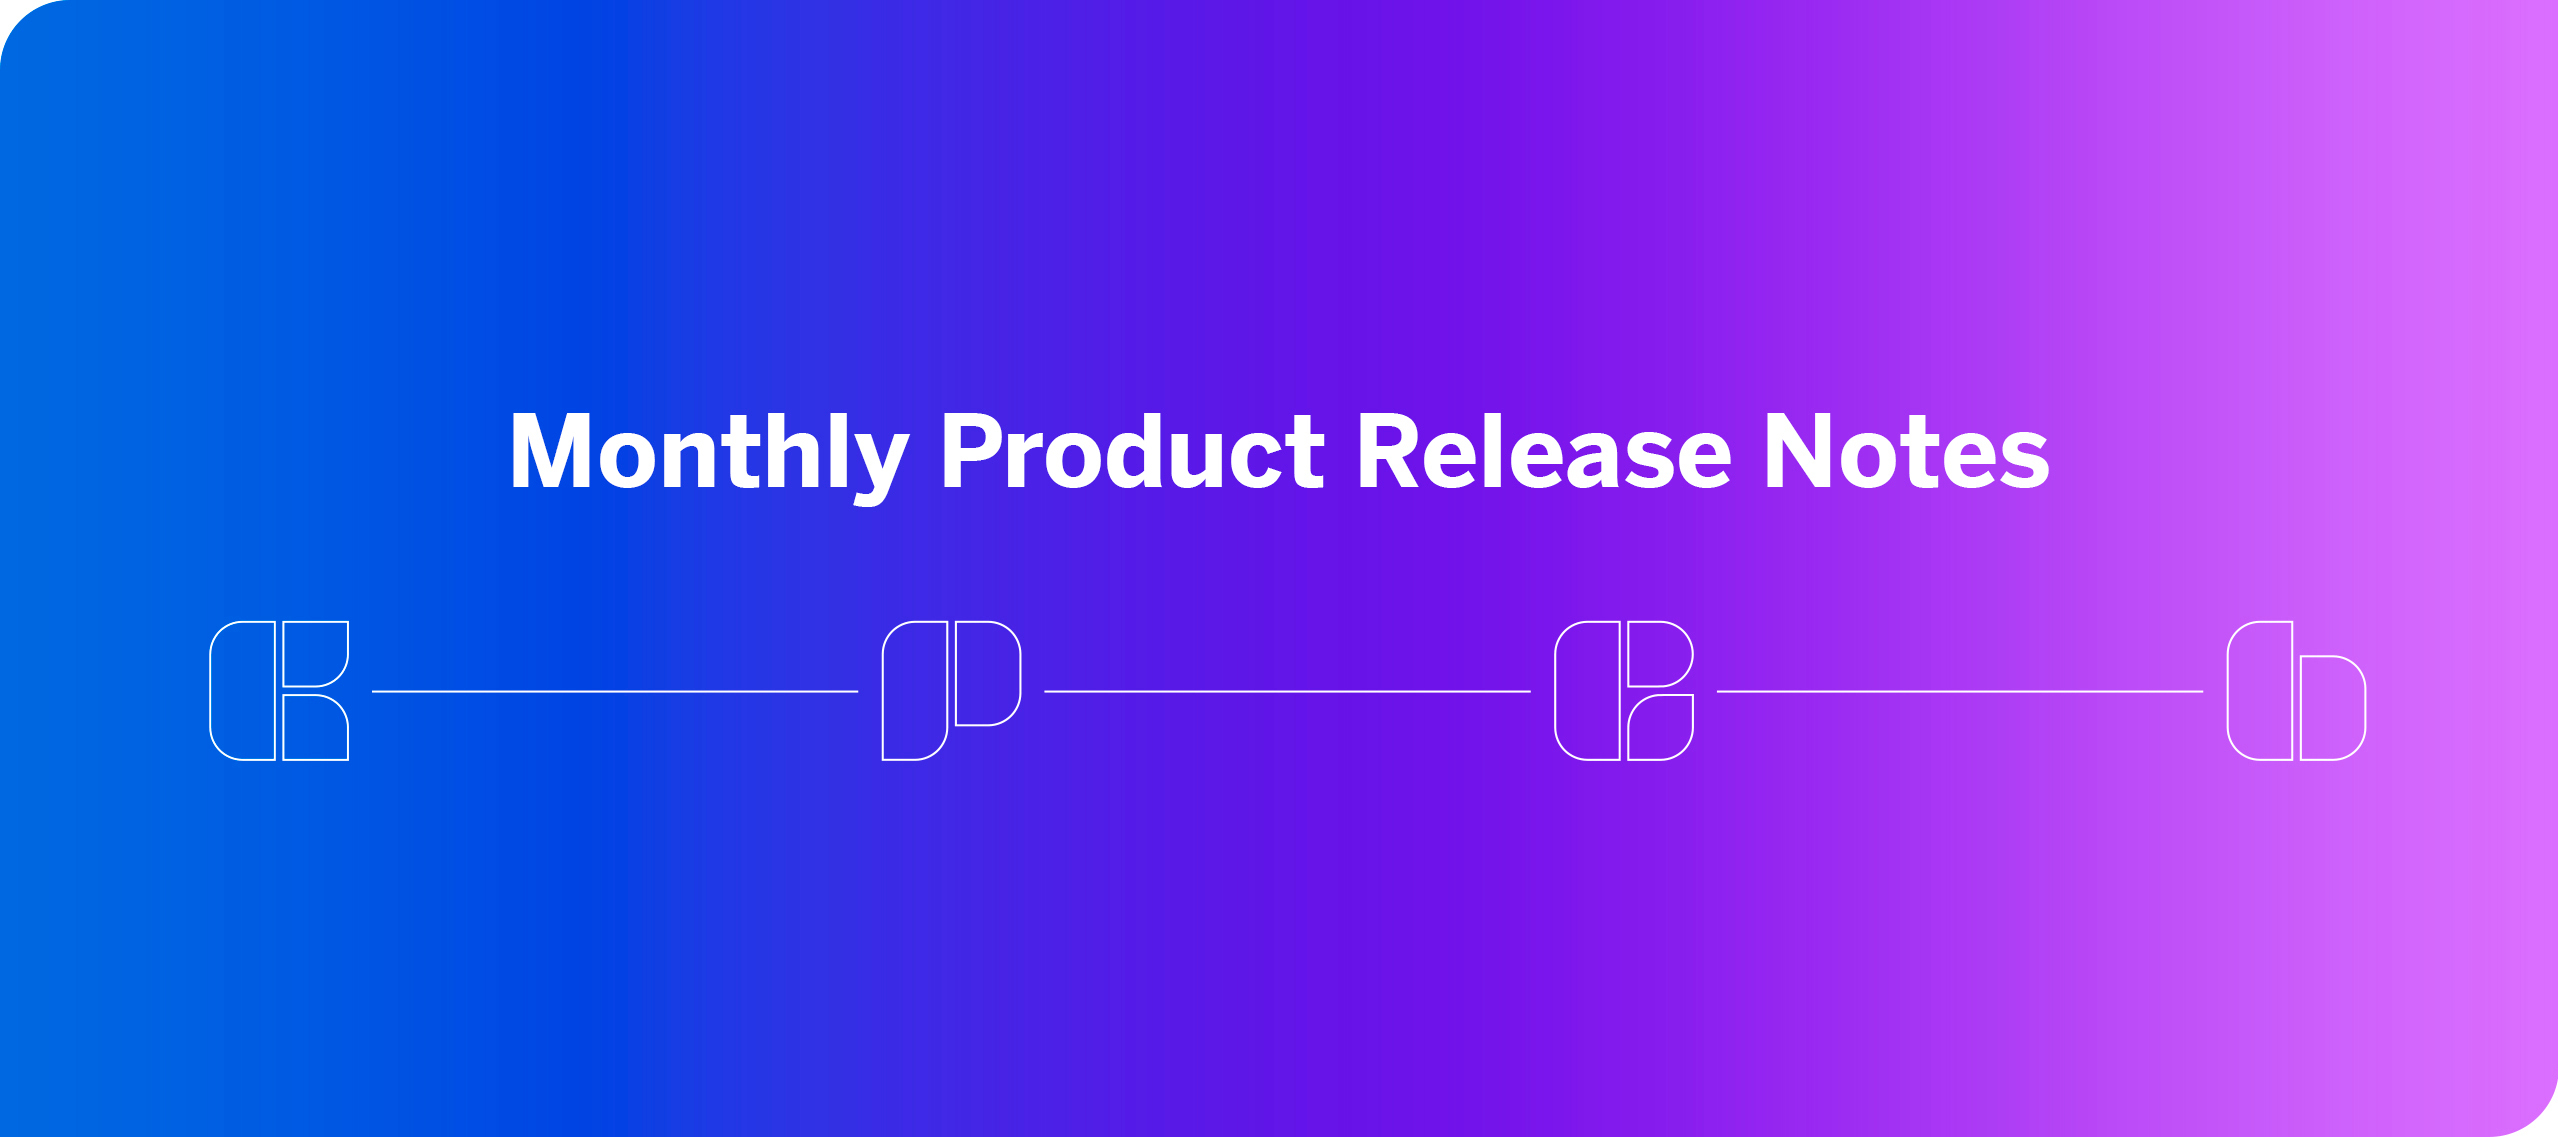 Monthly Product Release Notes - May 4, 2023 to June 7, 2023